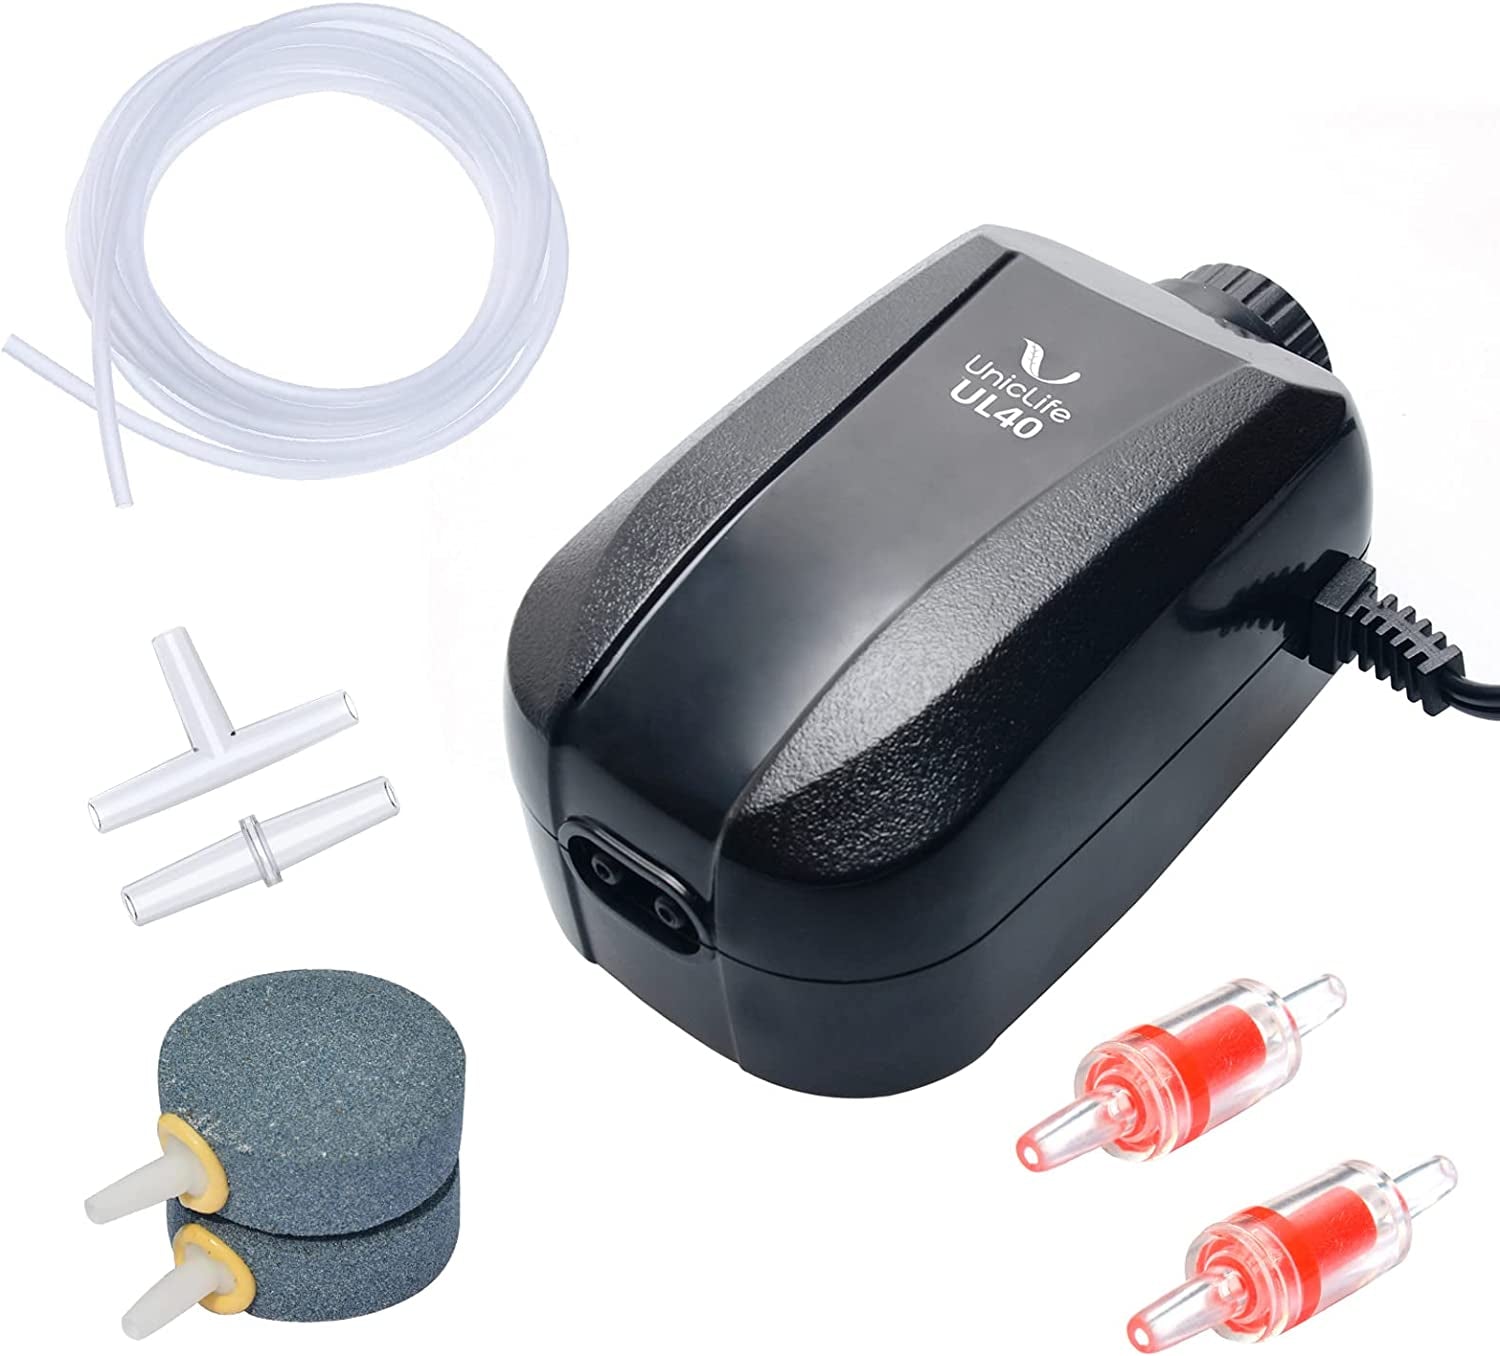 Aquarium Air Pump Dual Outlet Fish Tank Aerator with Accessories for up to 200 Gallon Tank